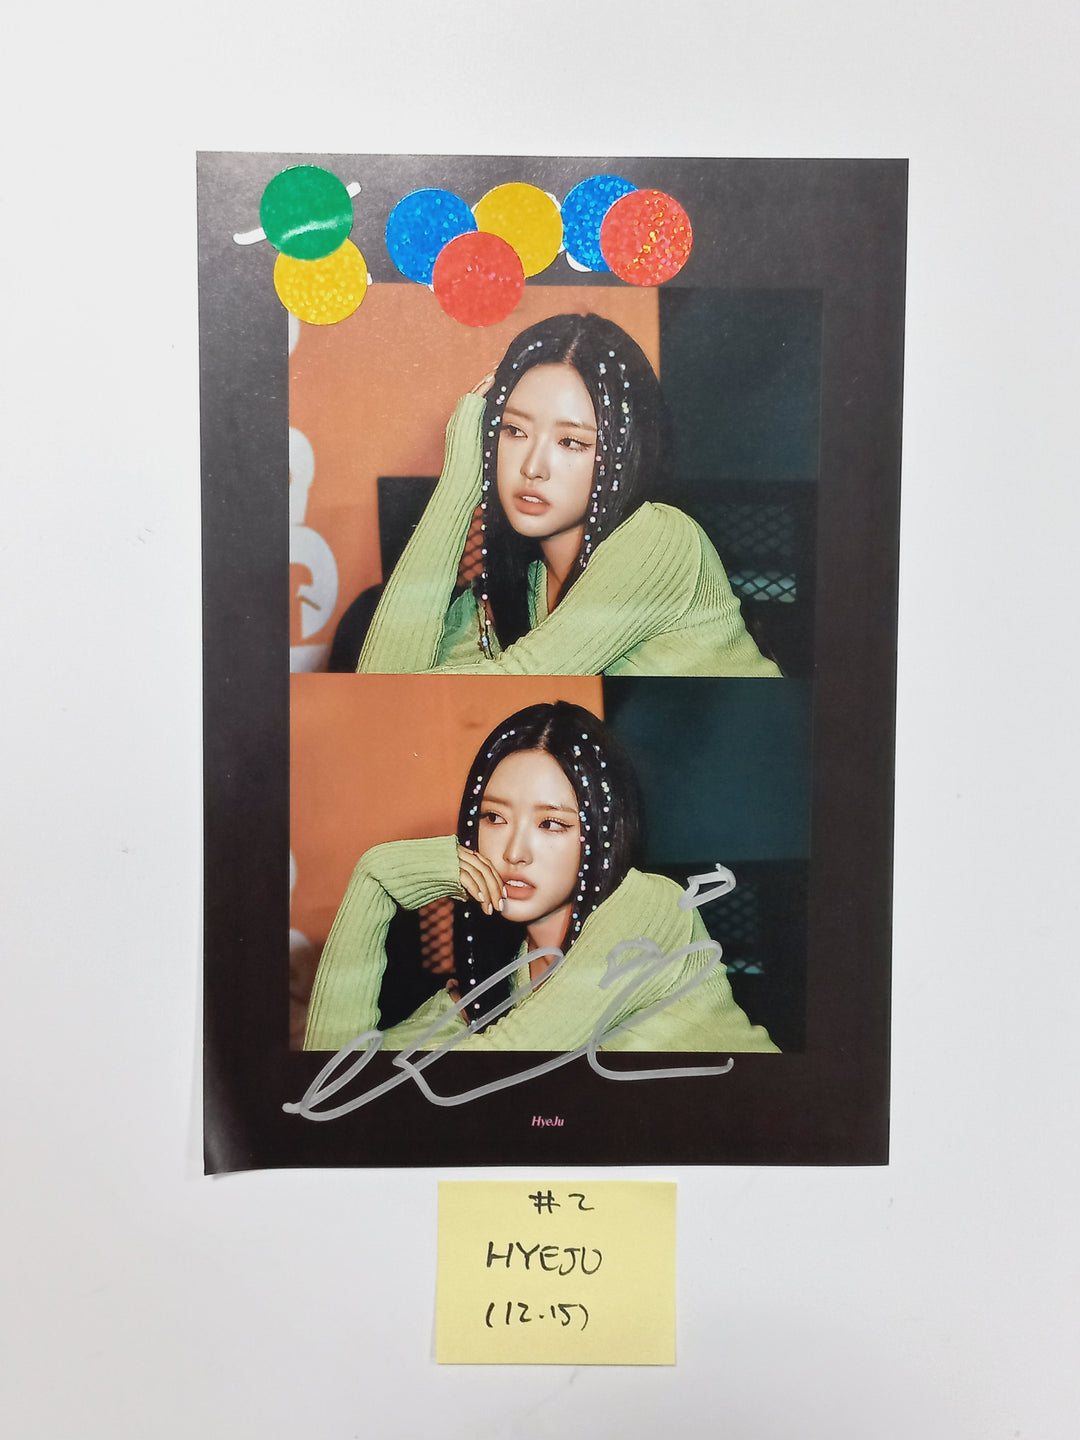 Loossemble "Loossemble" - A Cut Page From Fansign Event Album (Gowon, Hyeju) [23.12.15]